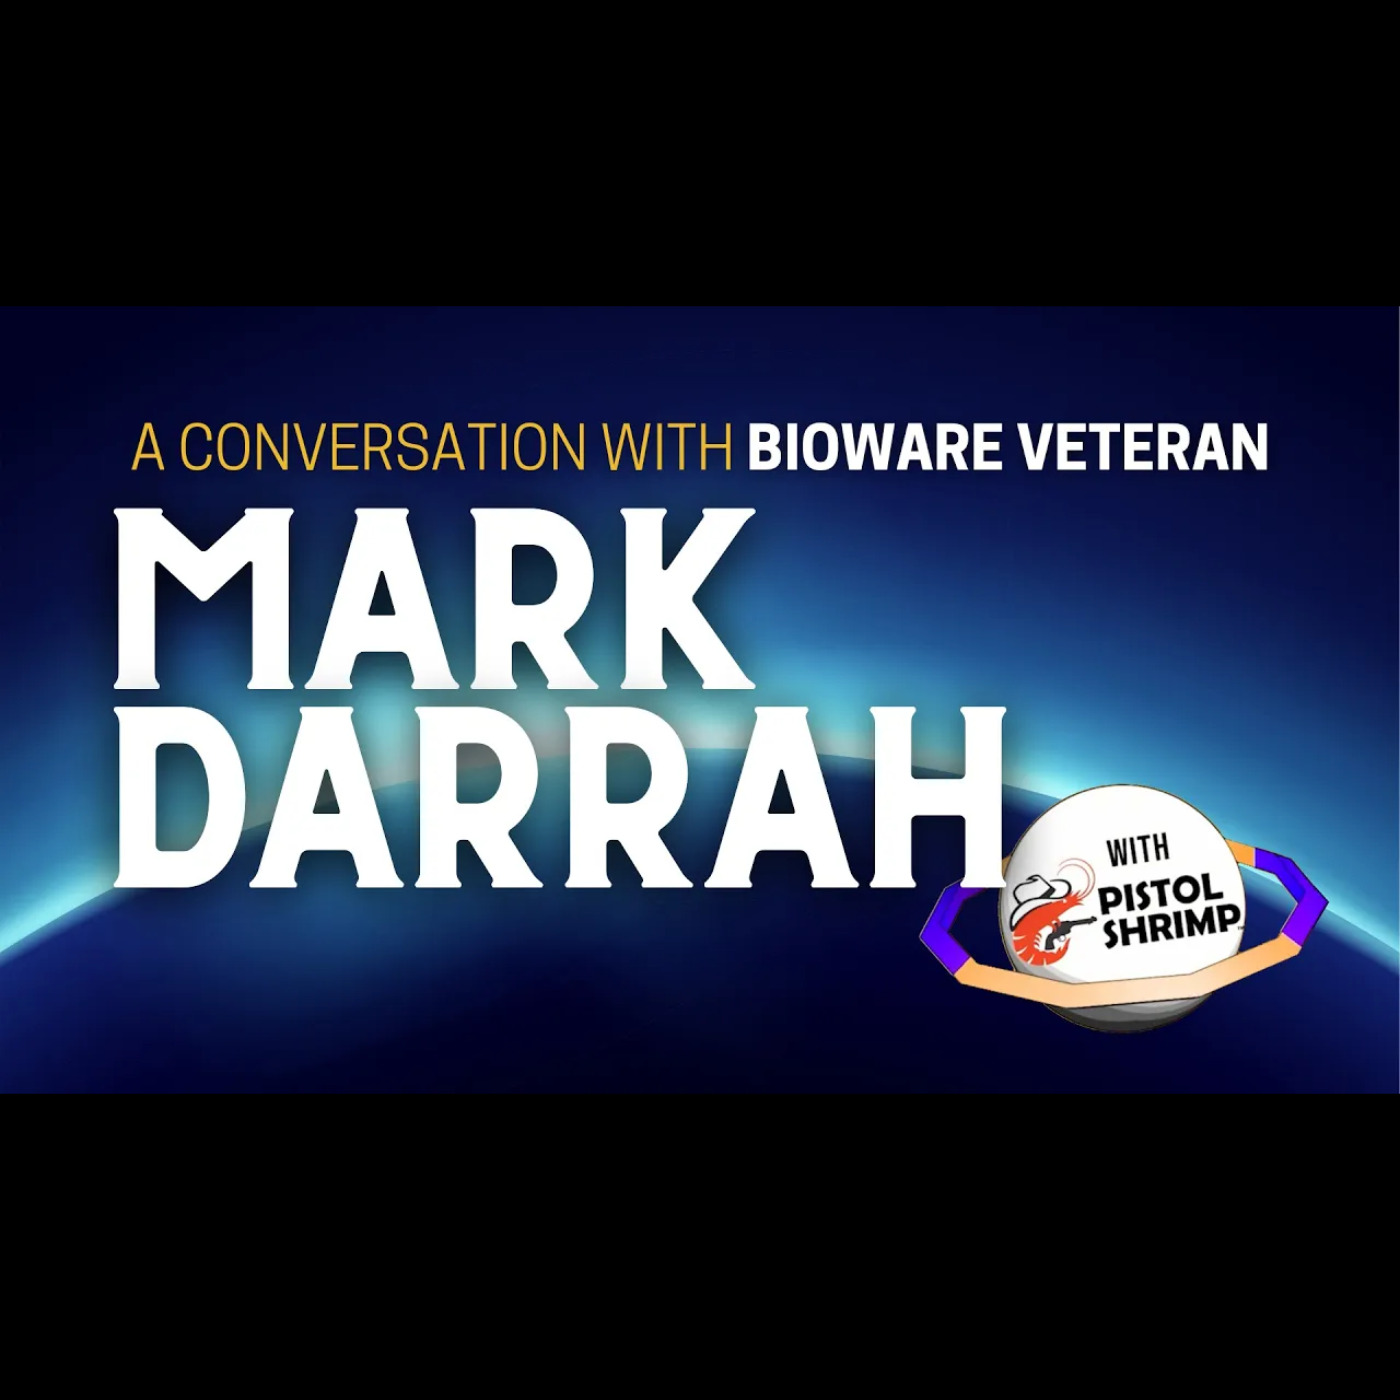 Channel 44: A Conversation with Mark Darrah